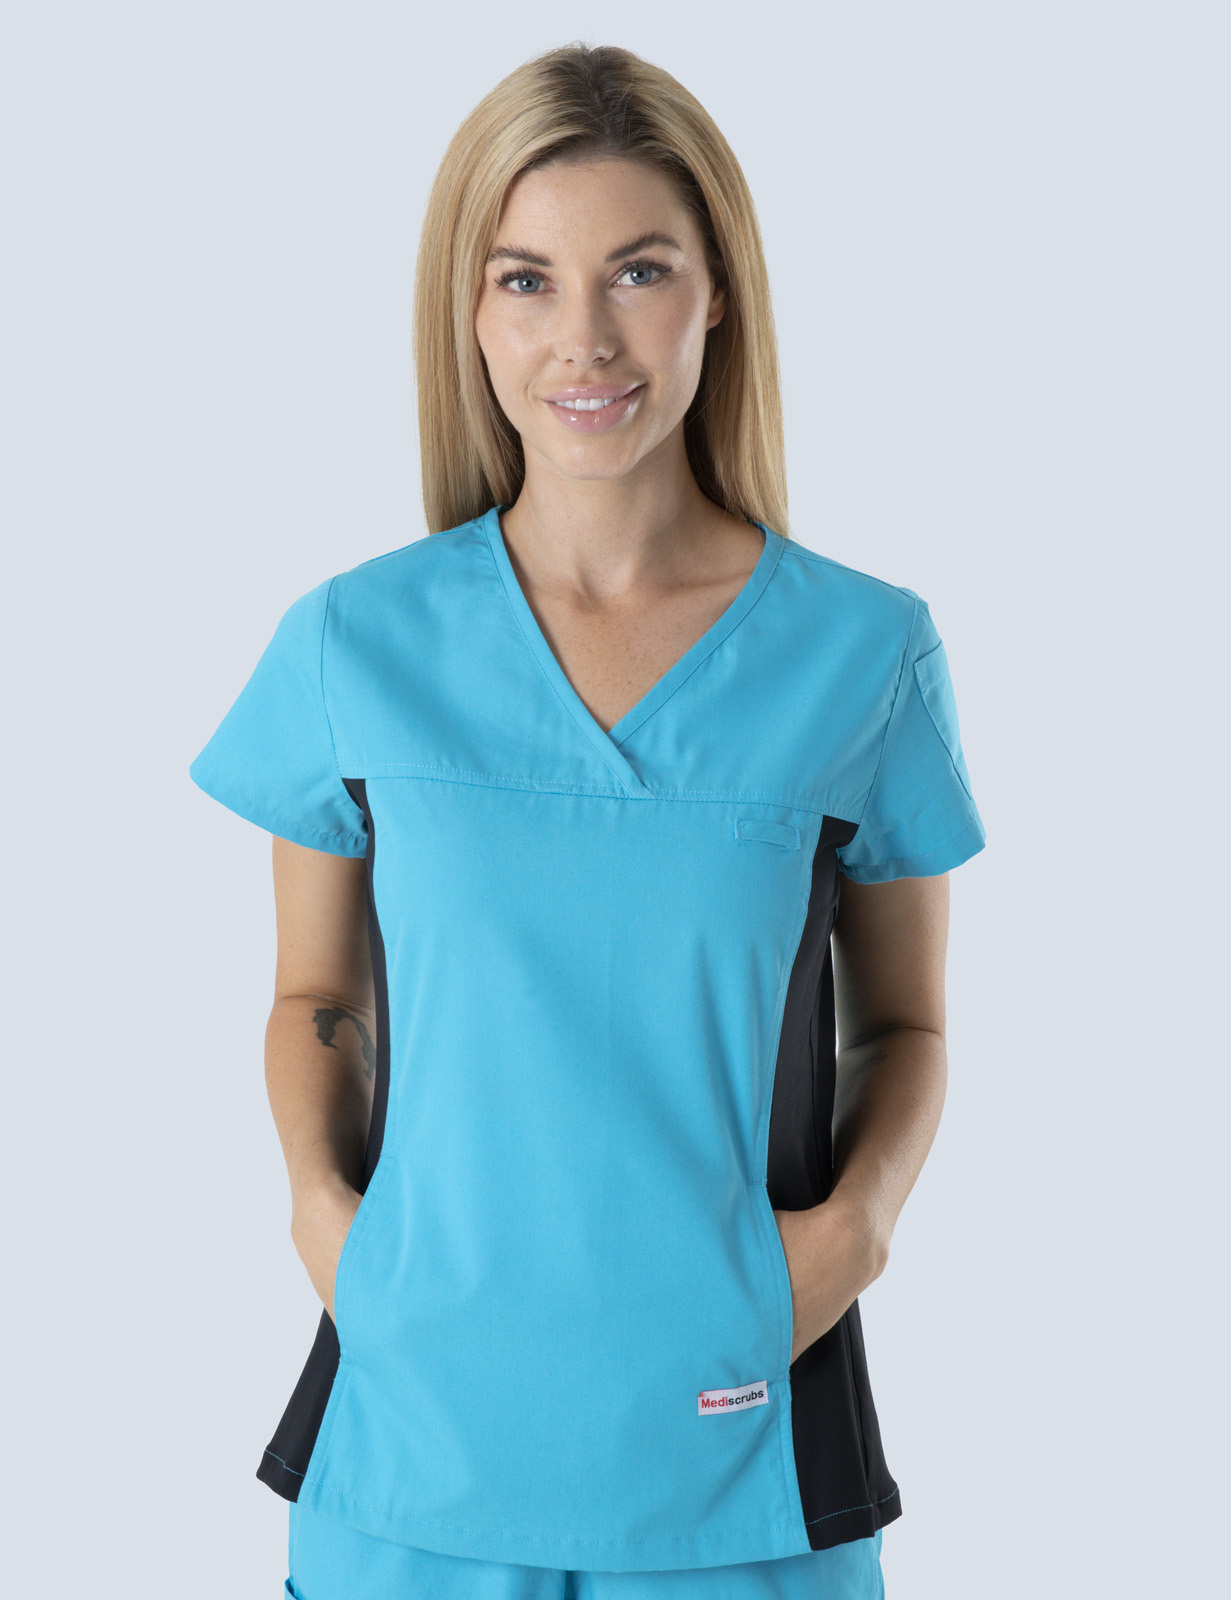 Women's Fit Solid Scrub Top With Spandex Panel - Aqua - 4X large